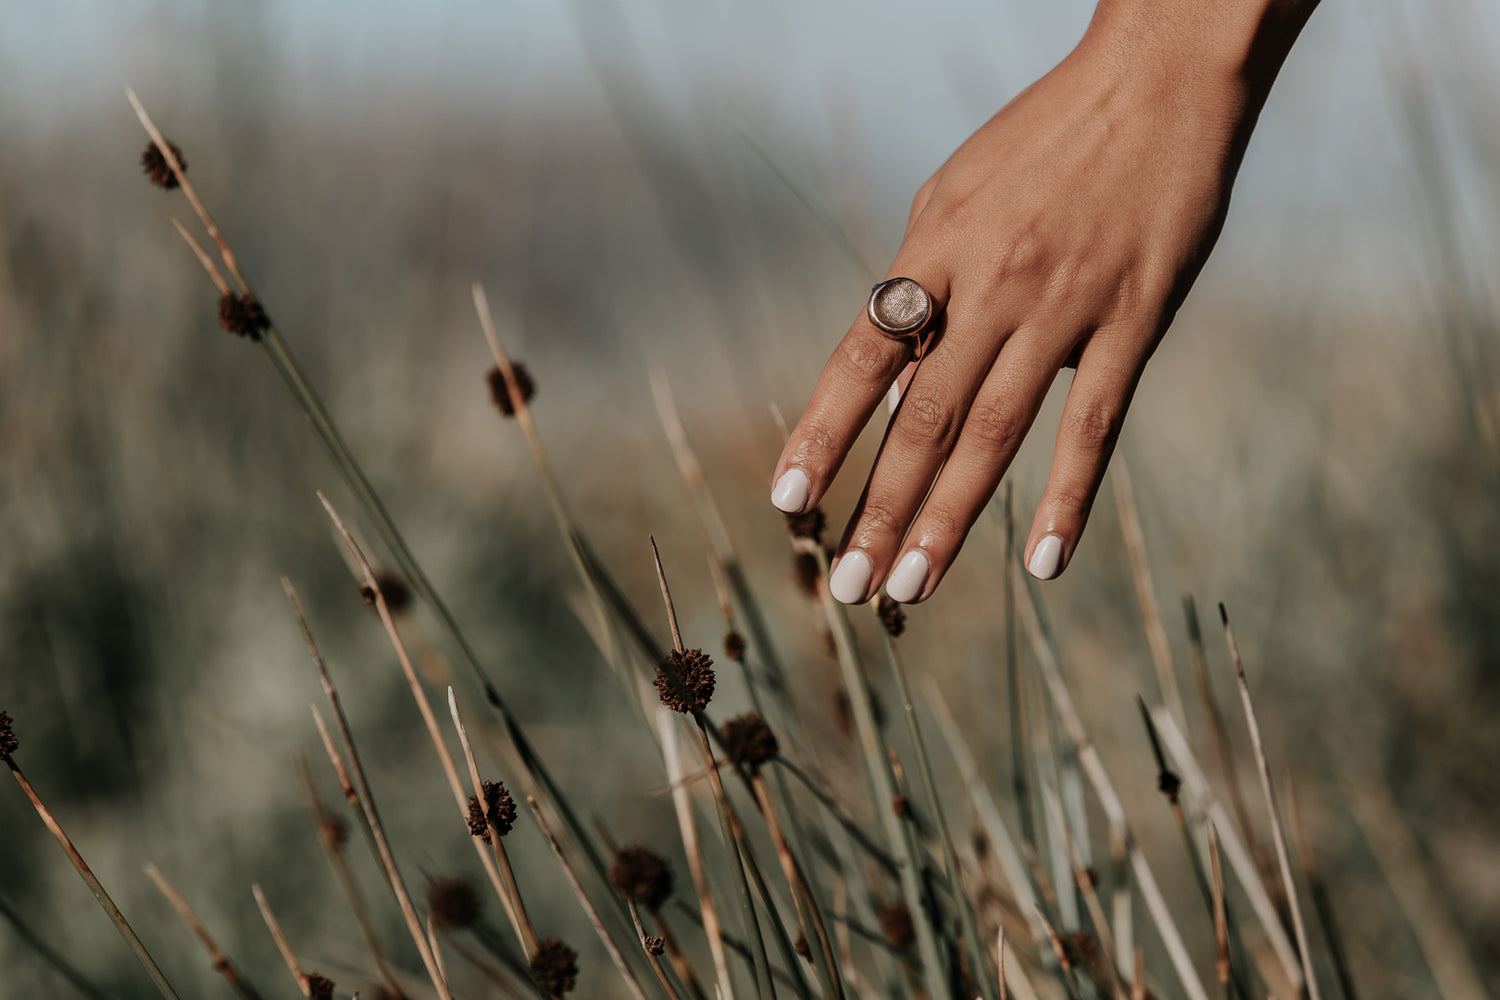 An artful photo of a lady's hand, wearing a fingerprint impression ring on her index finger, over some grasses.